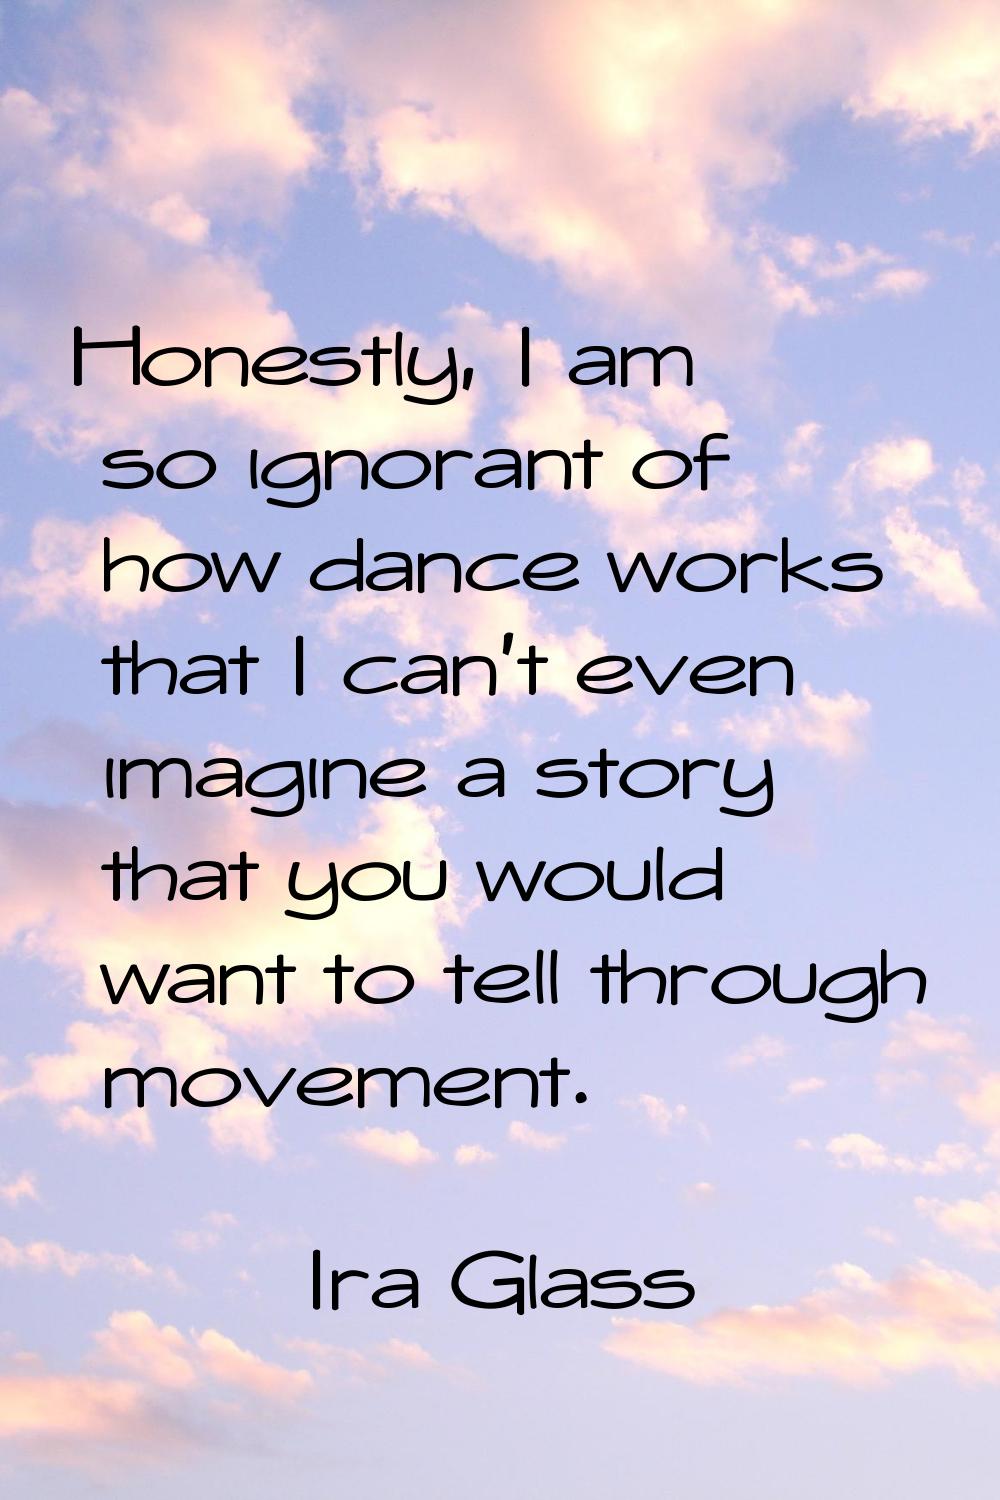 Honestly, I am so ignorant of how dance works that I can't even imagine a story that you would want